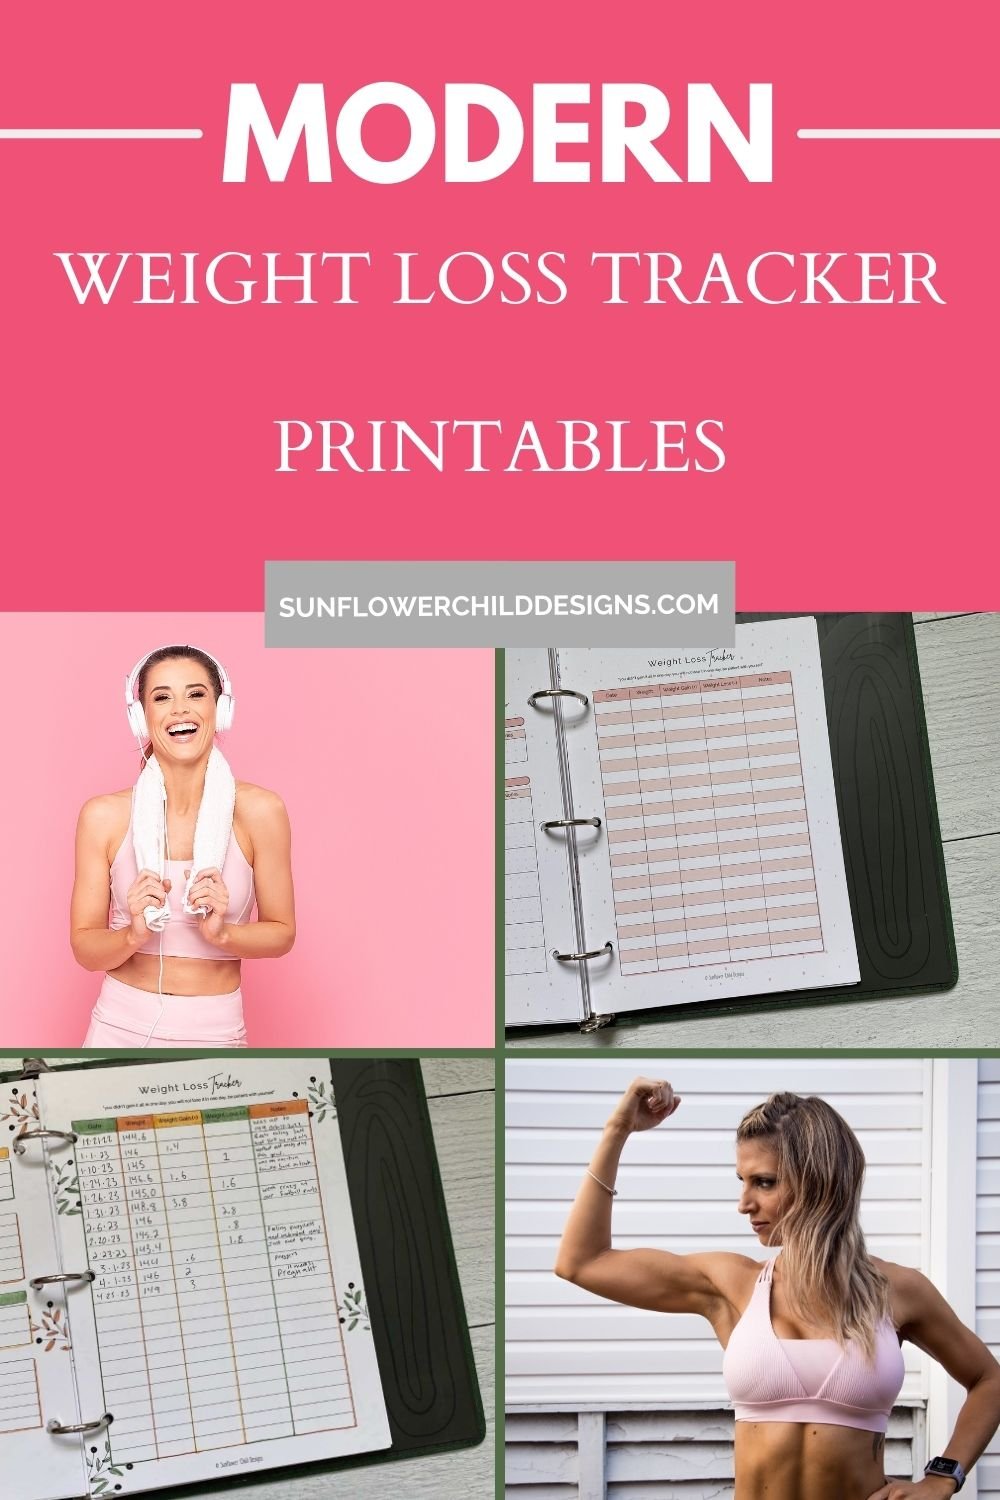 "Revolutionize Your Fitness Journey with this Modern Weight Loss Tracker Printable!"